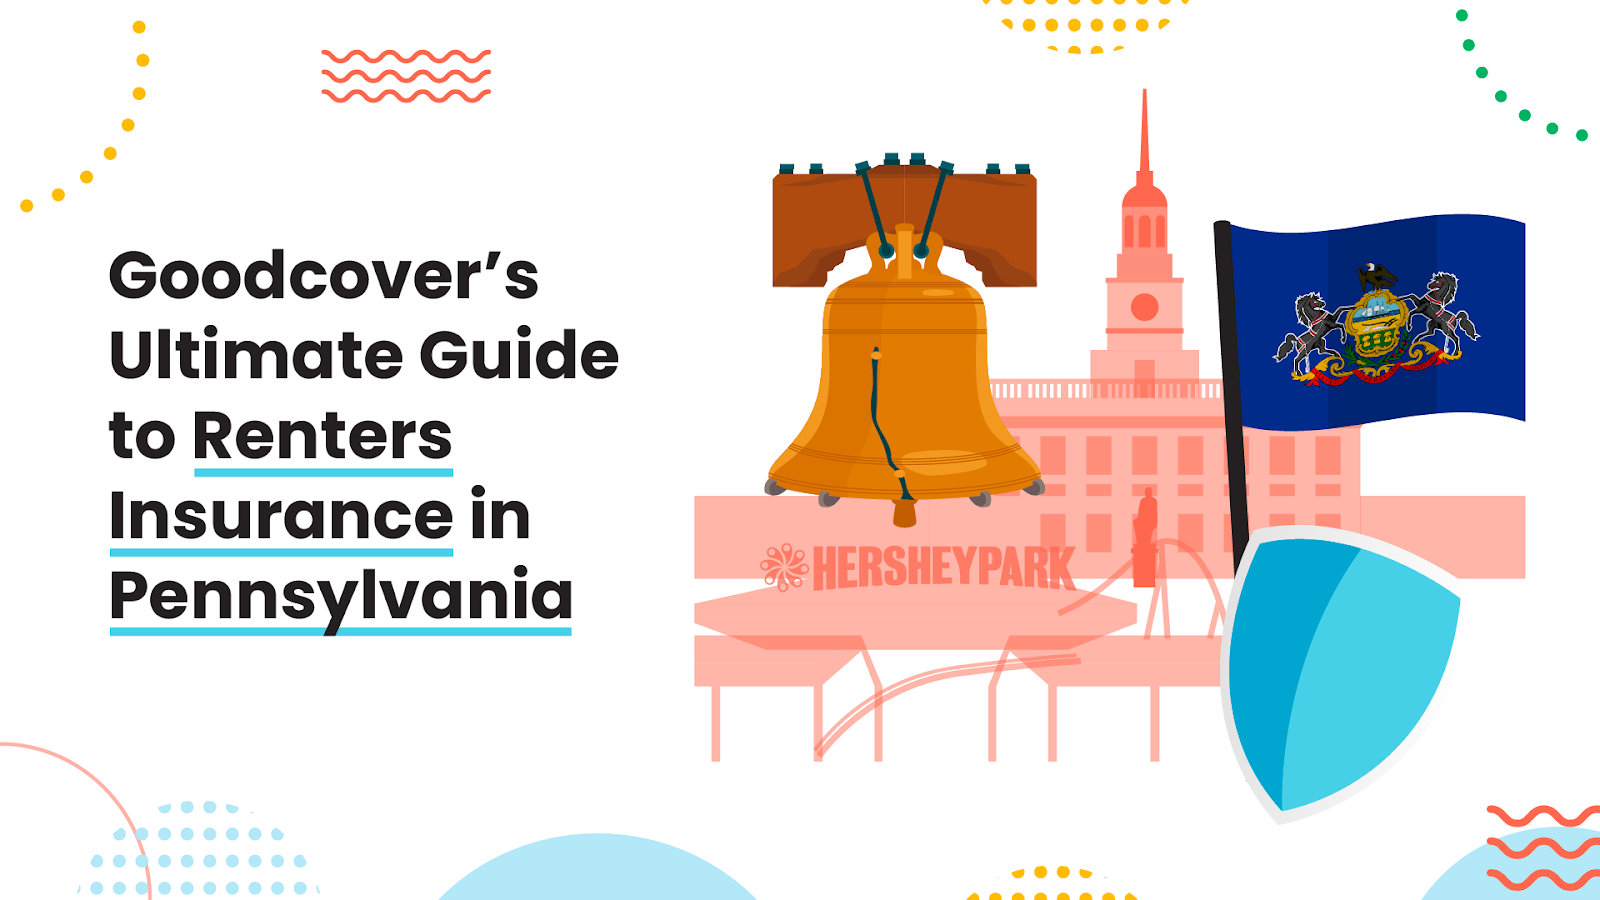 Goodcover’s Ultimate Guide to Renters Insurance in Pennsylvania